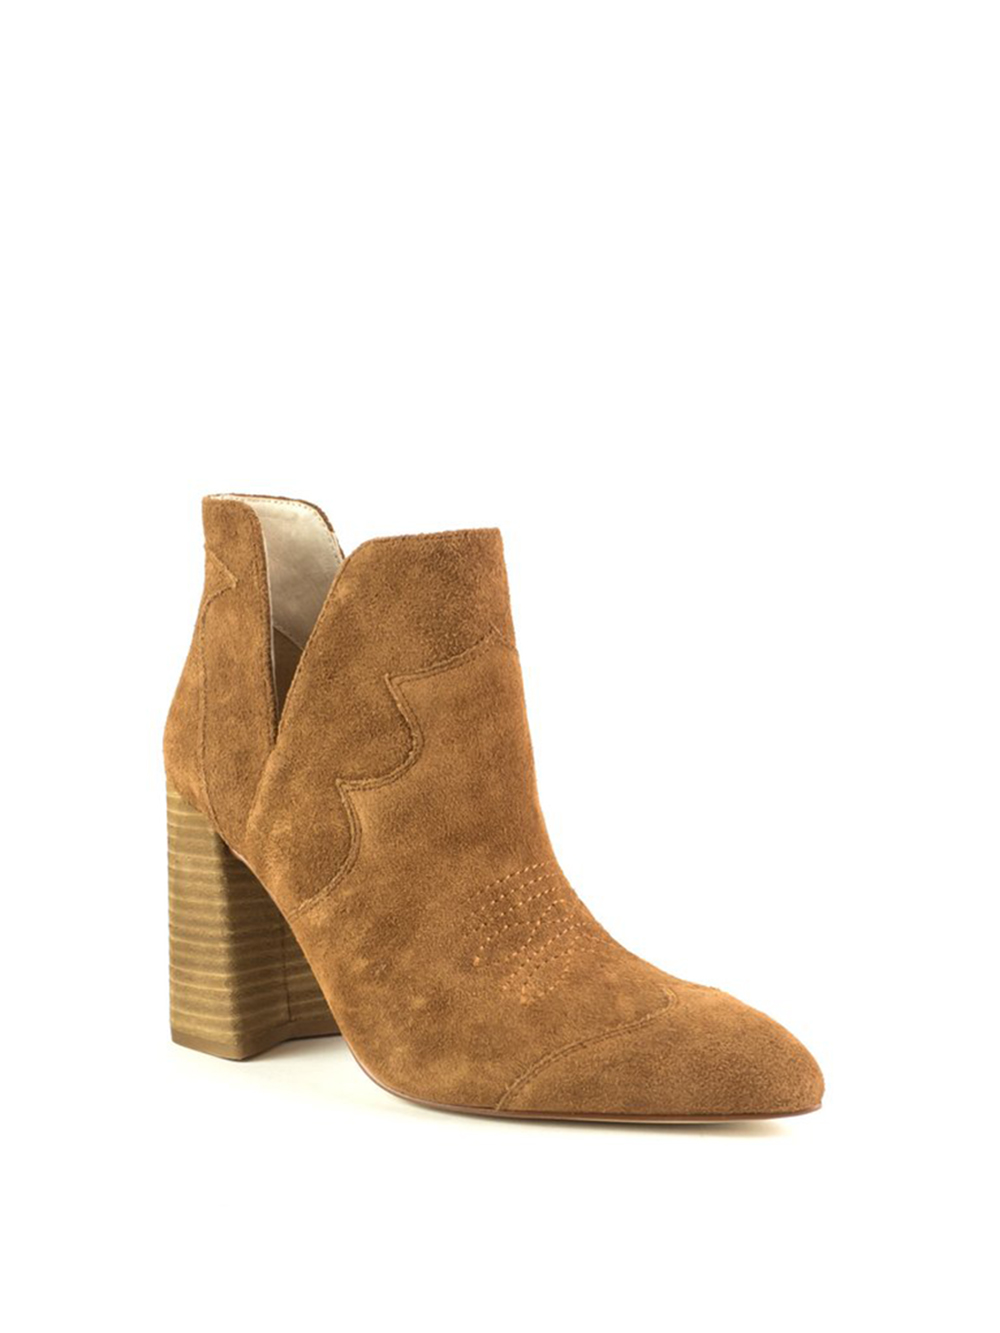 Shelly's London boots, $148